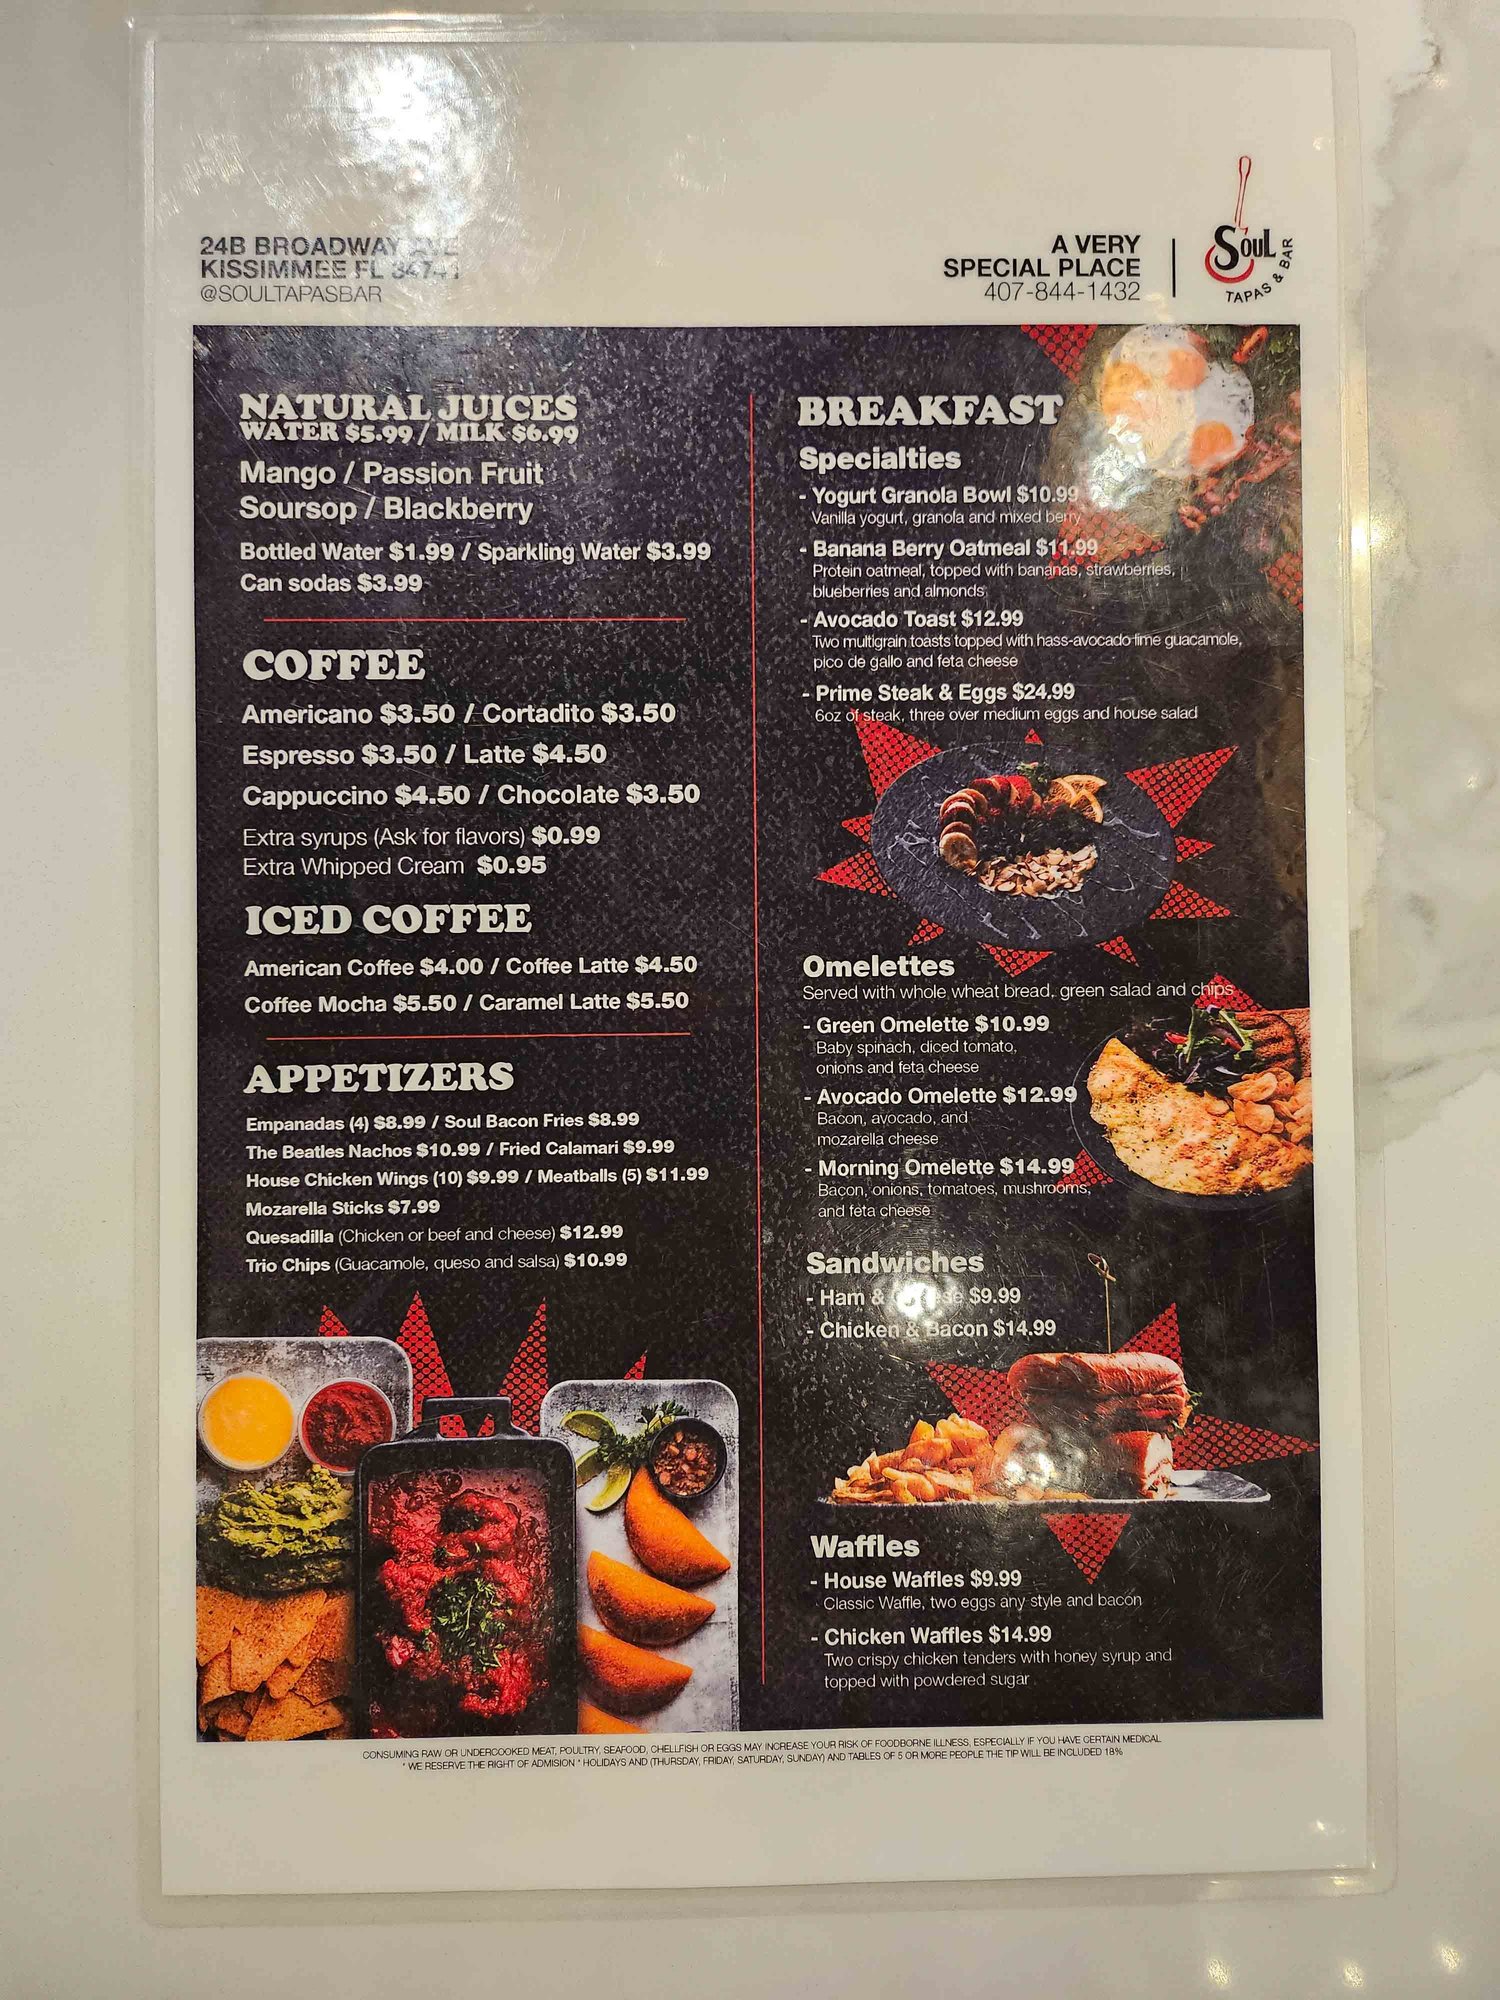 black laminated menu with food and drink items